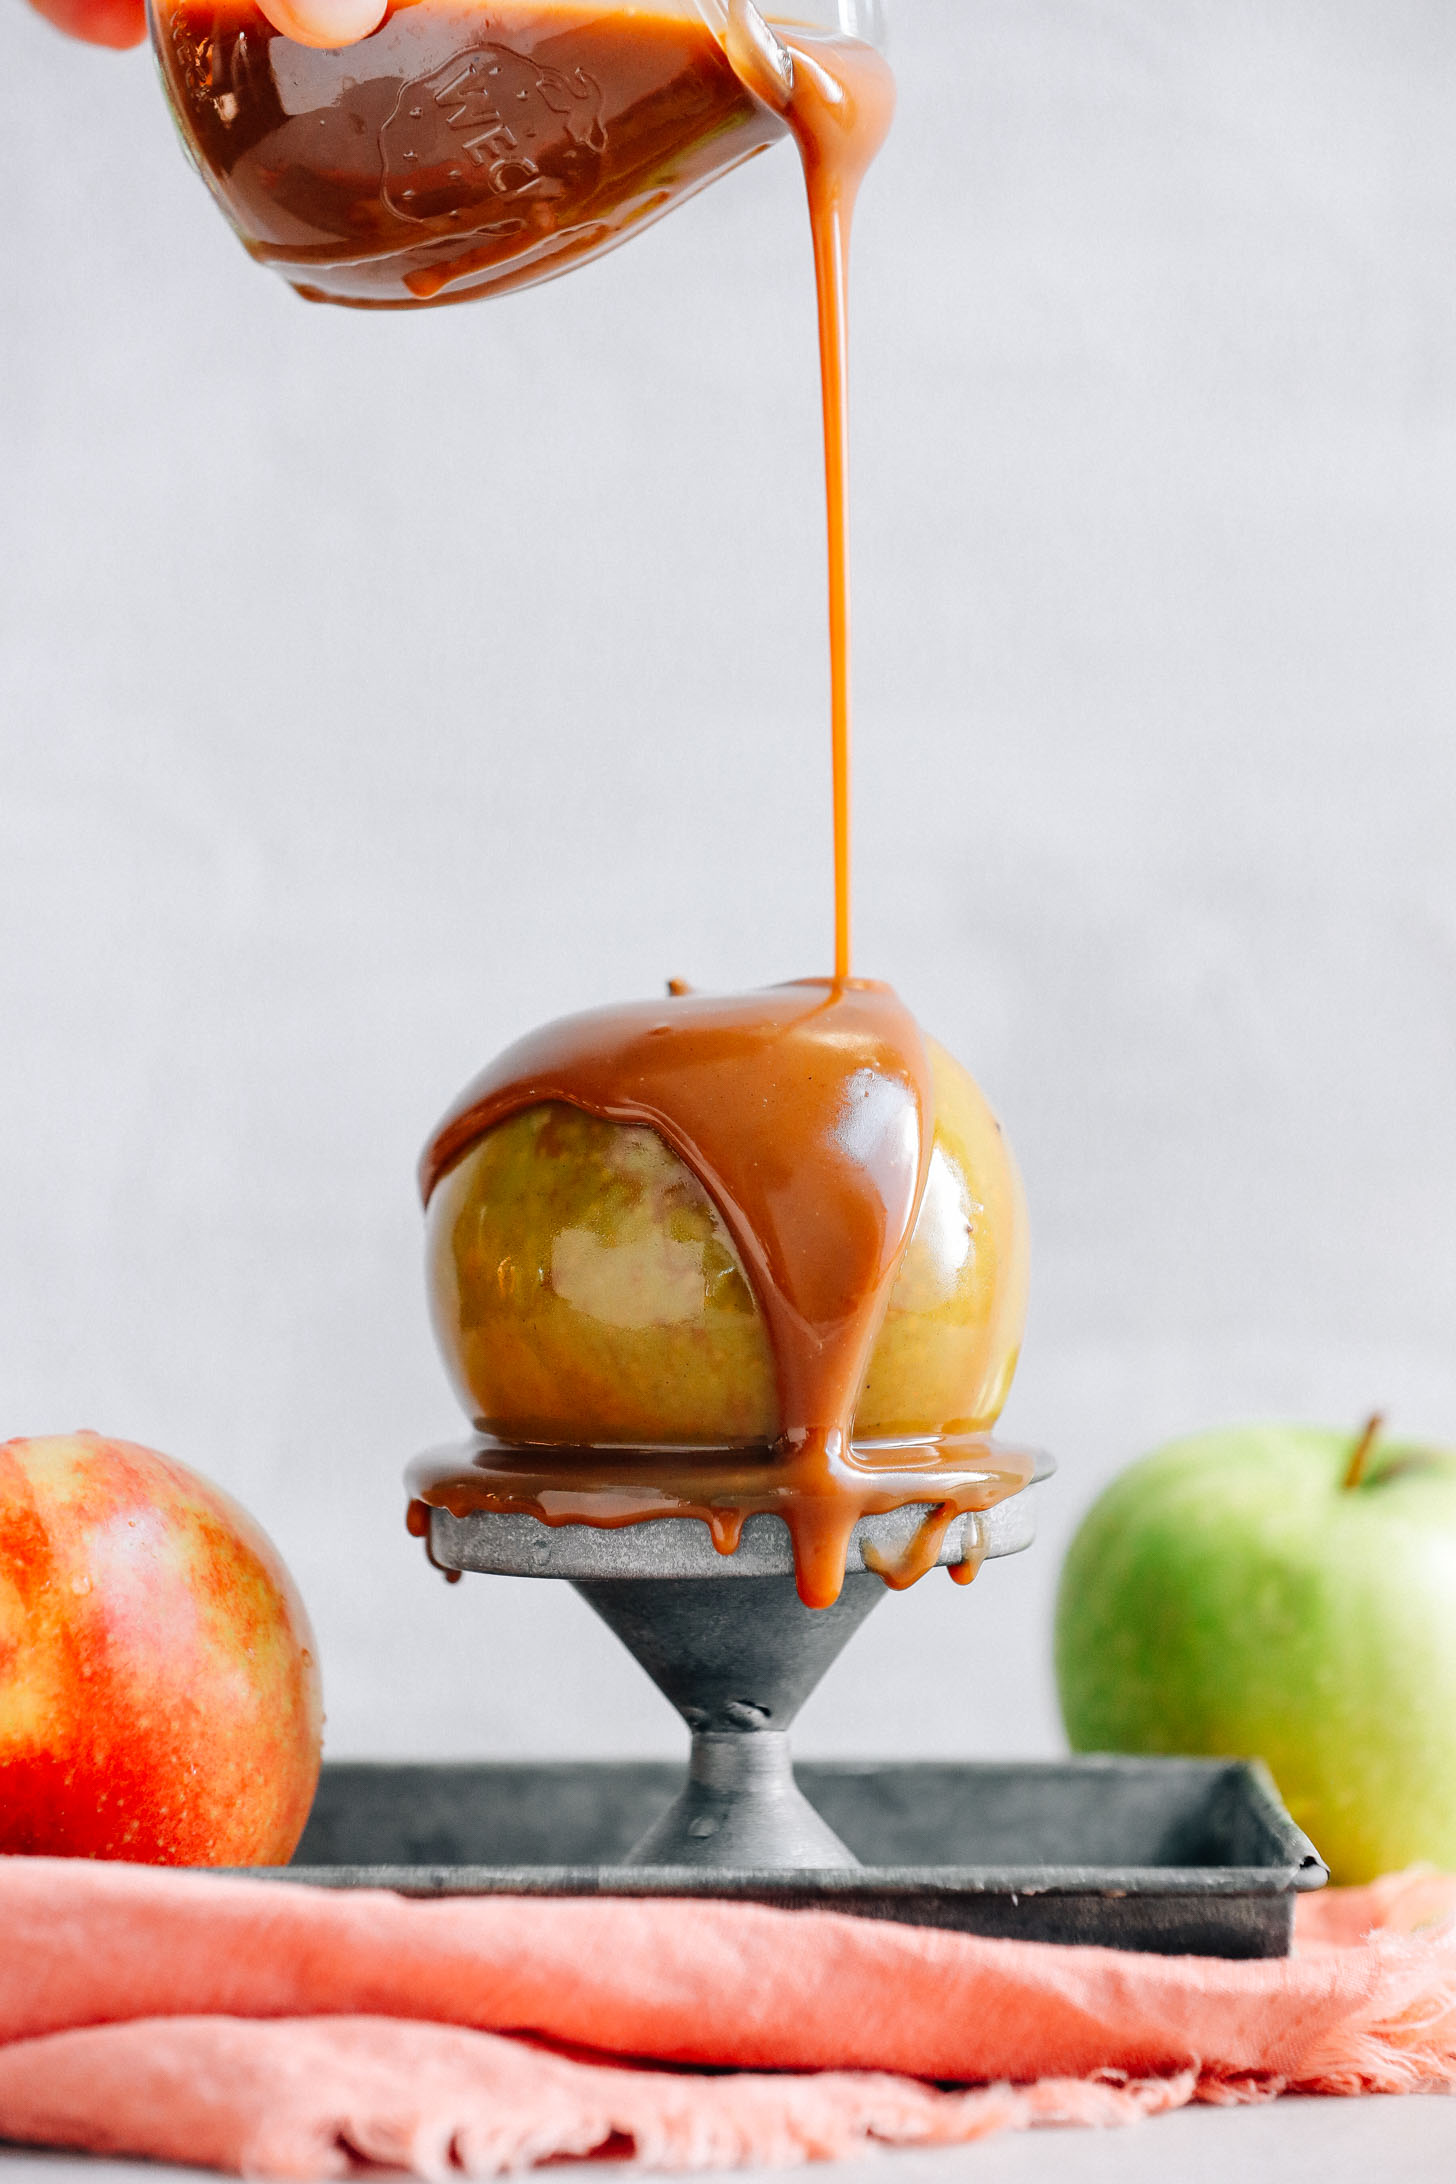 Pouring AMAZING Vegan Caramel Sauce onto an apple perched on a metal stand